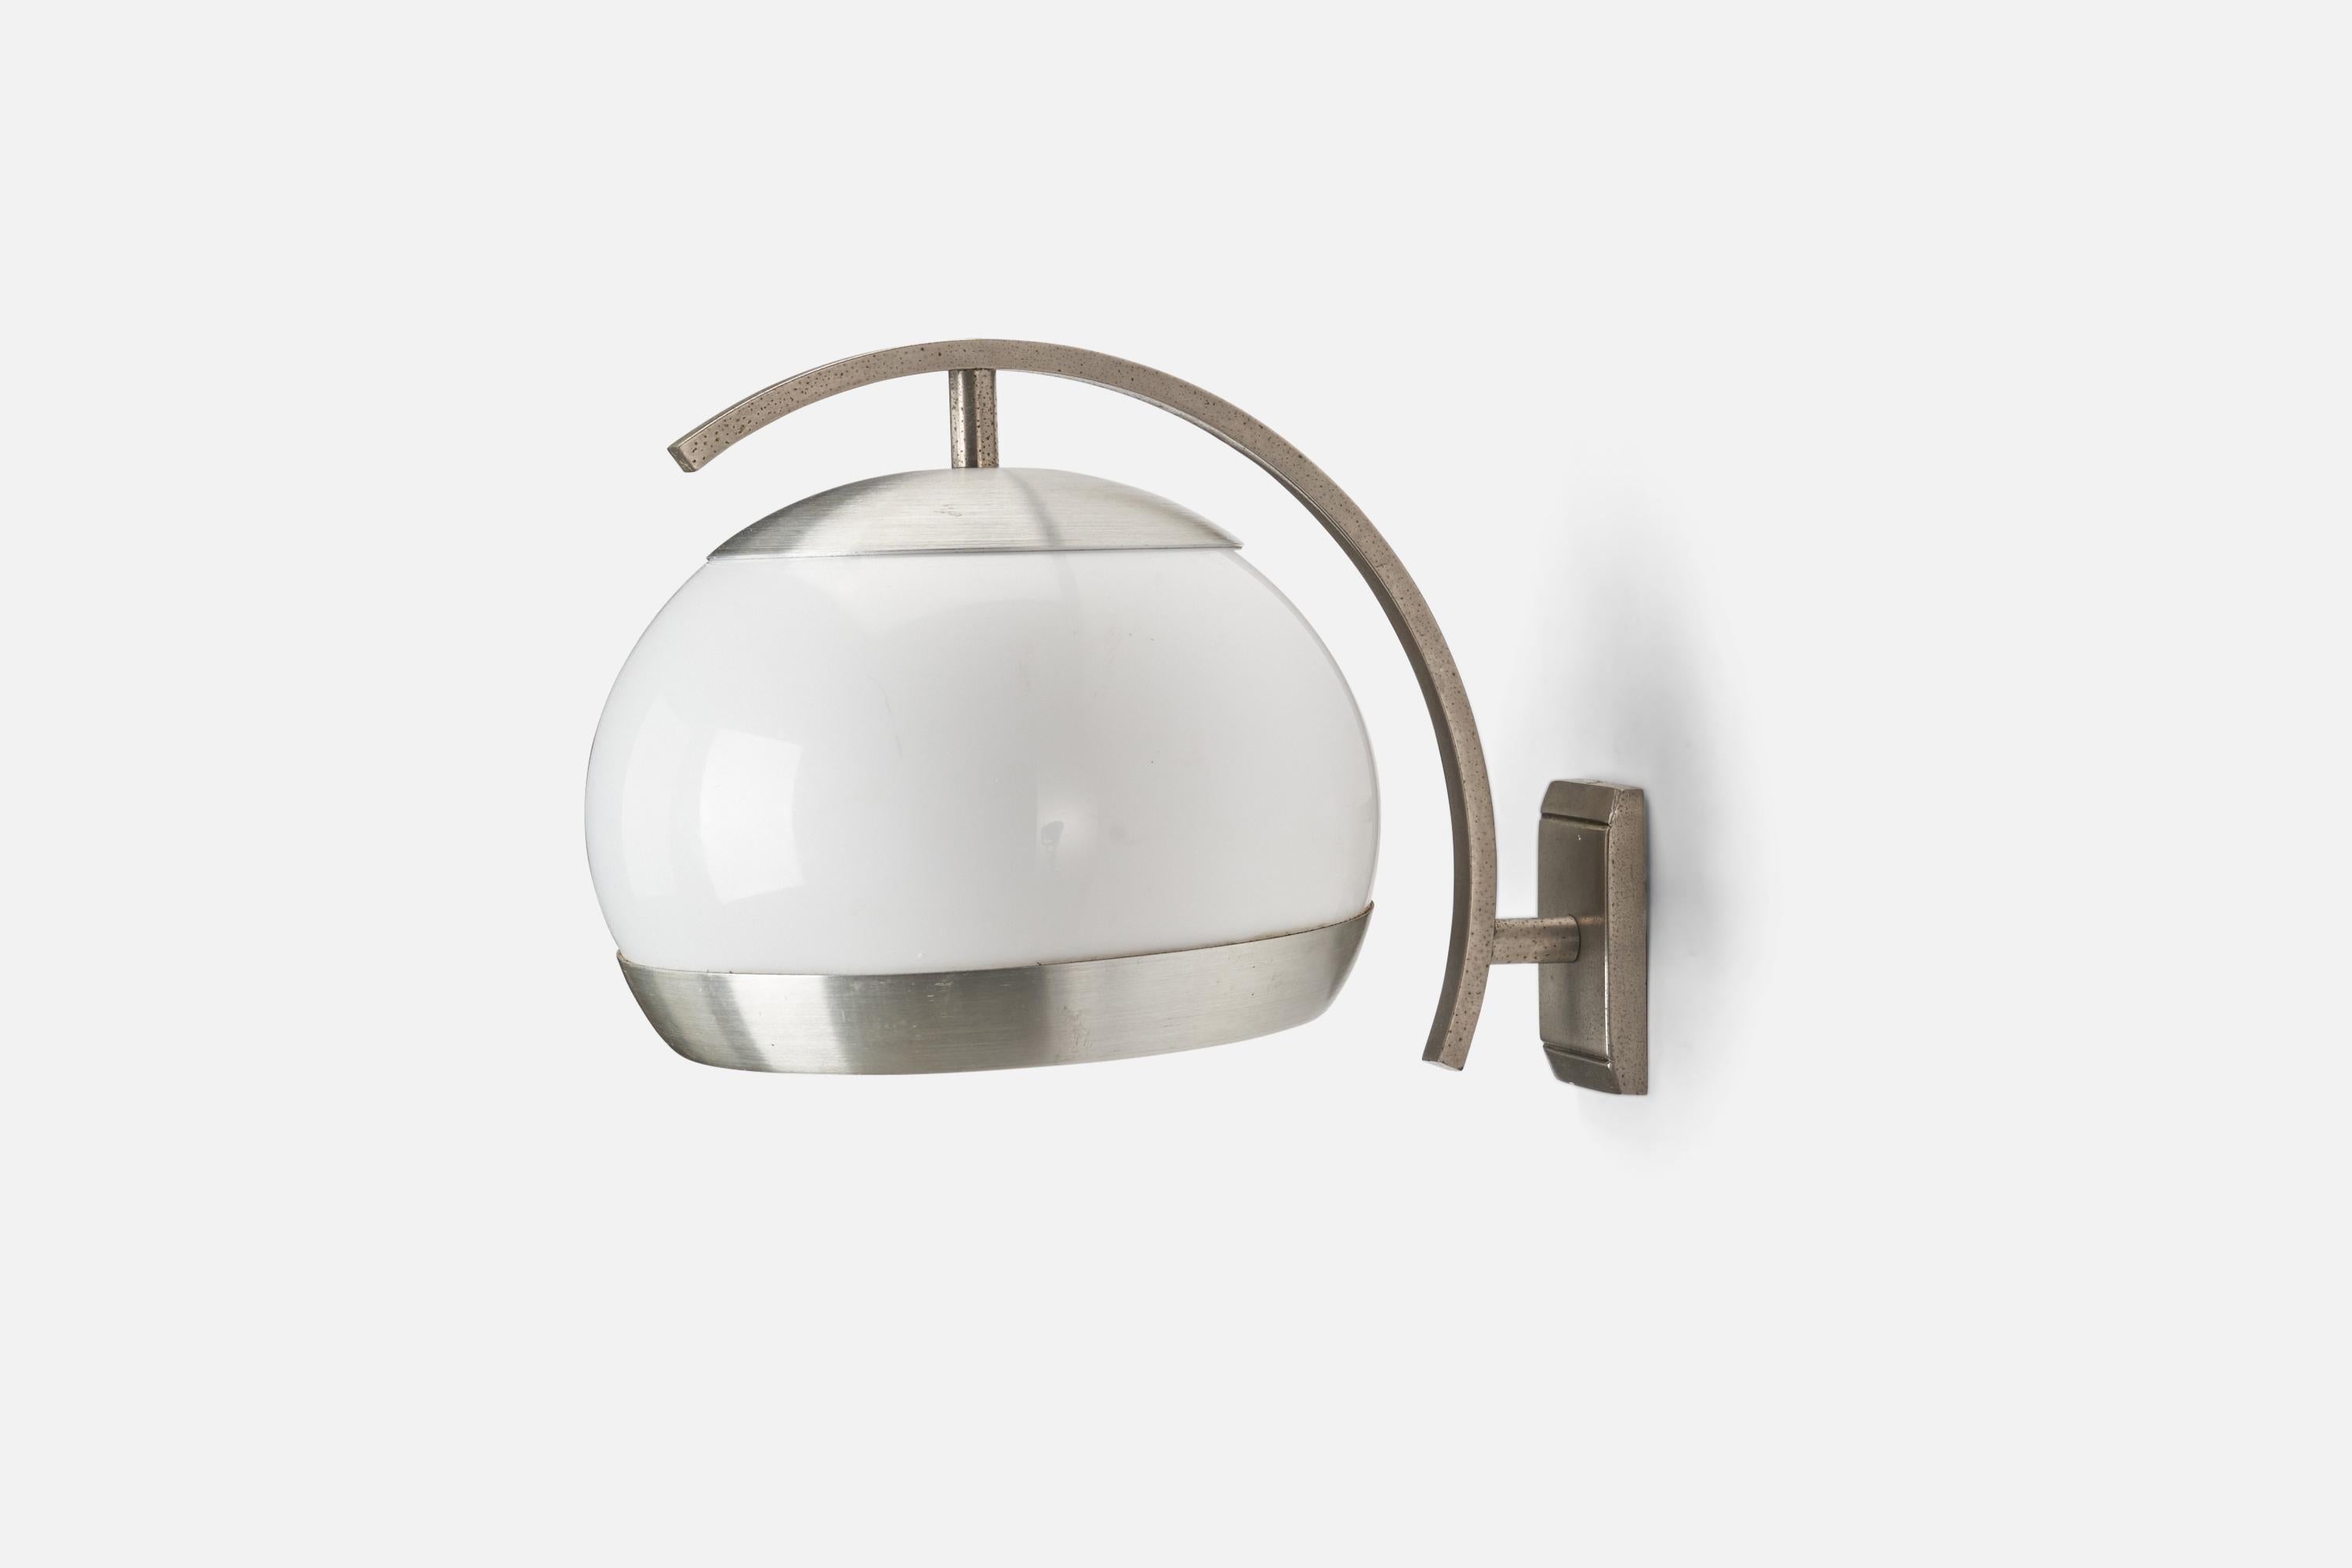 An acrylic and nickel-plated brass wall light designed and produced by Stilux Milano, Italy, 1960s.

Dimensions of back plate (inches) : 3.1 x 1.8 x 0.4 (Height x Width x Depth)

Socket takes E-14 bulb.

There is no maximum wattage stated on